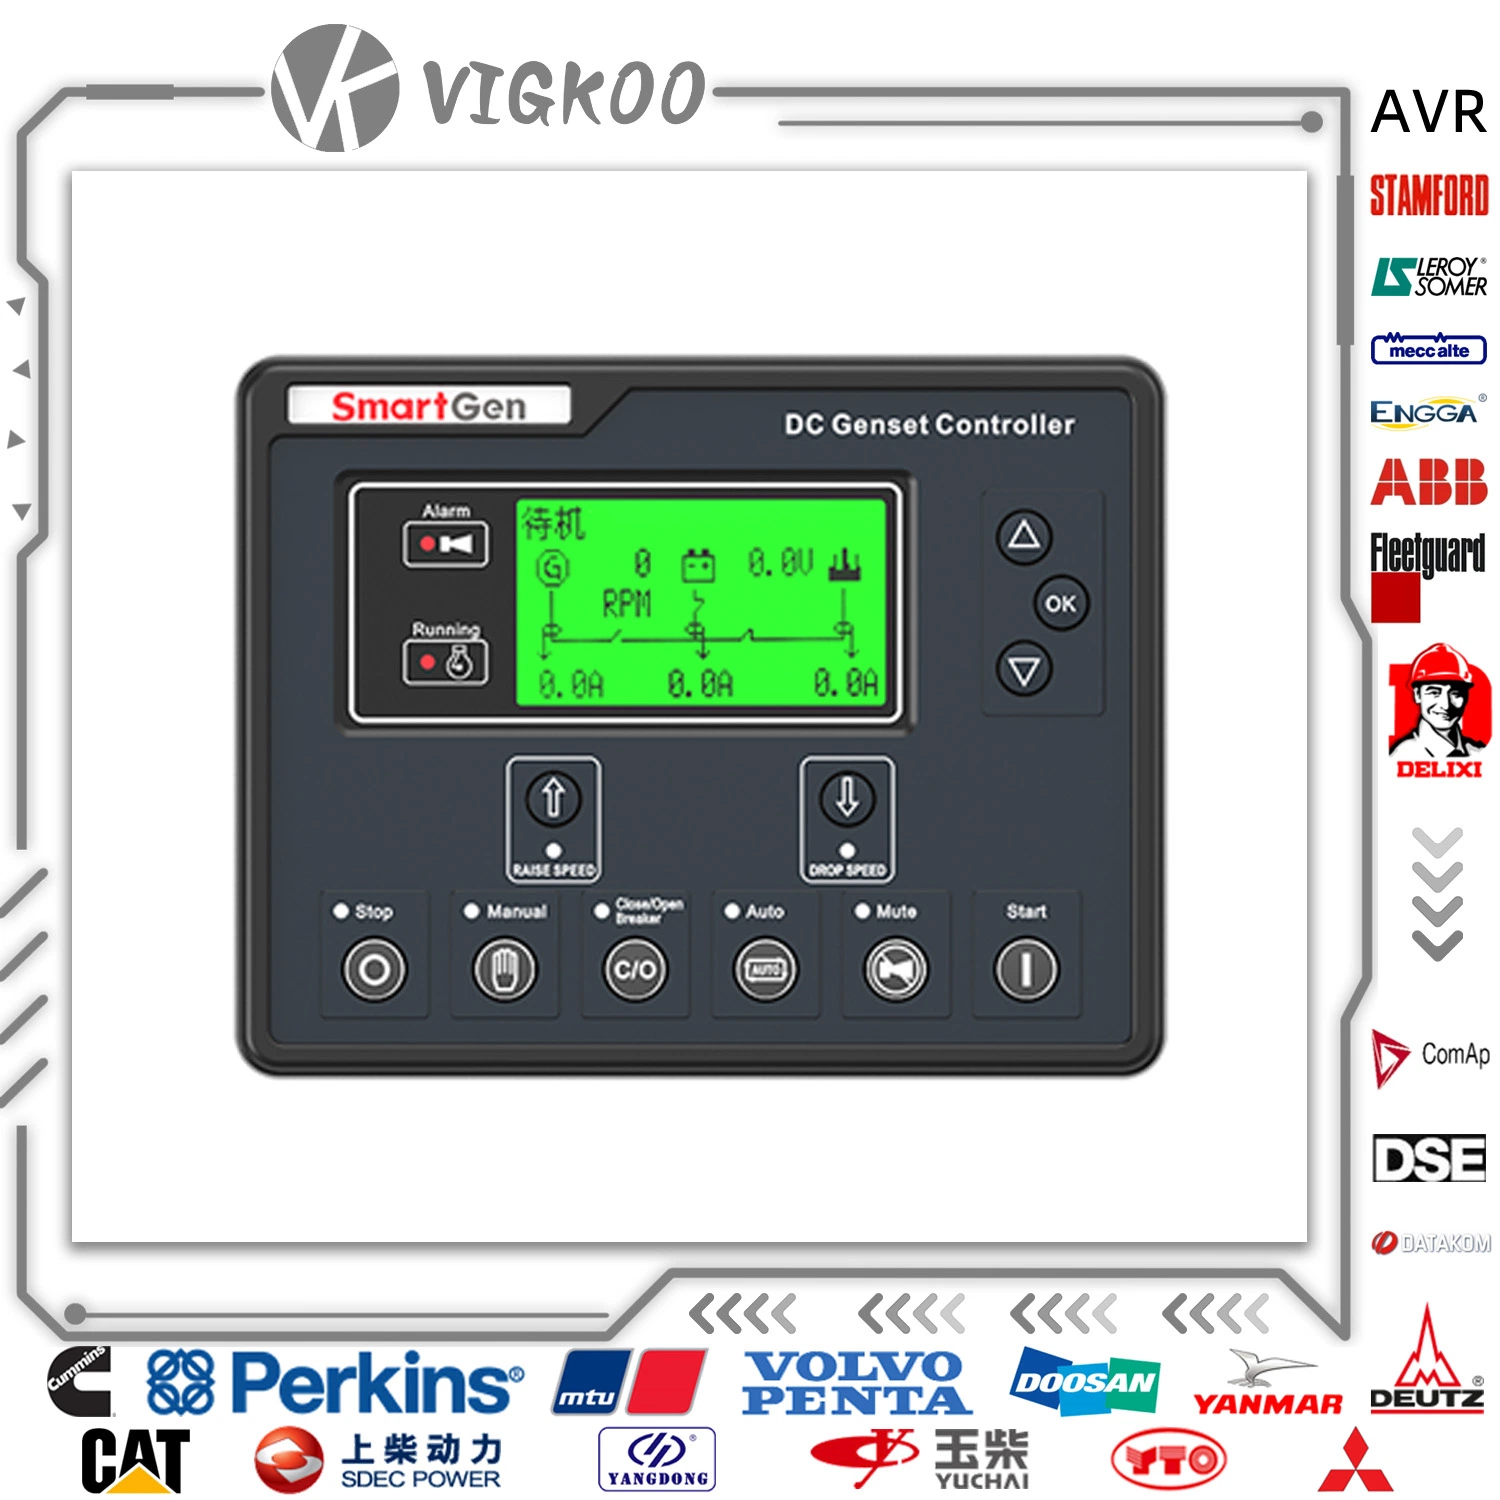 Smartgen Hgm7120can Genset Controllers for Genset Automation